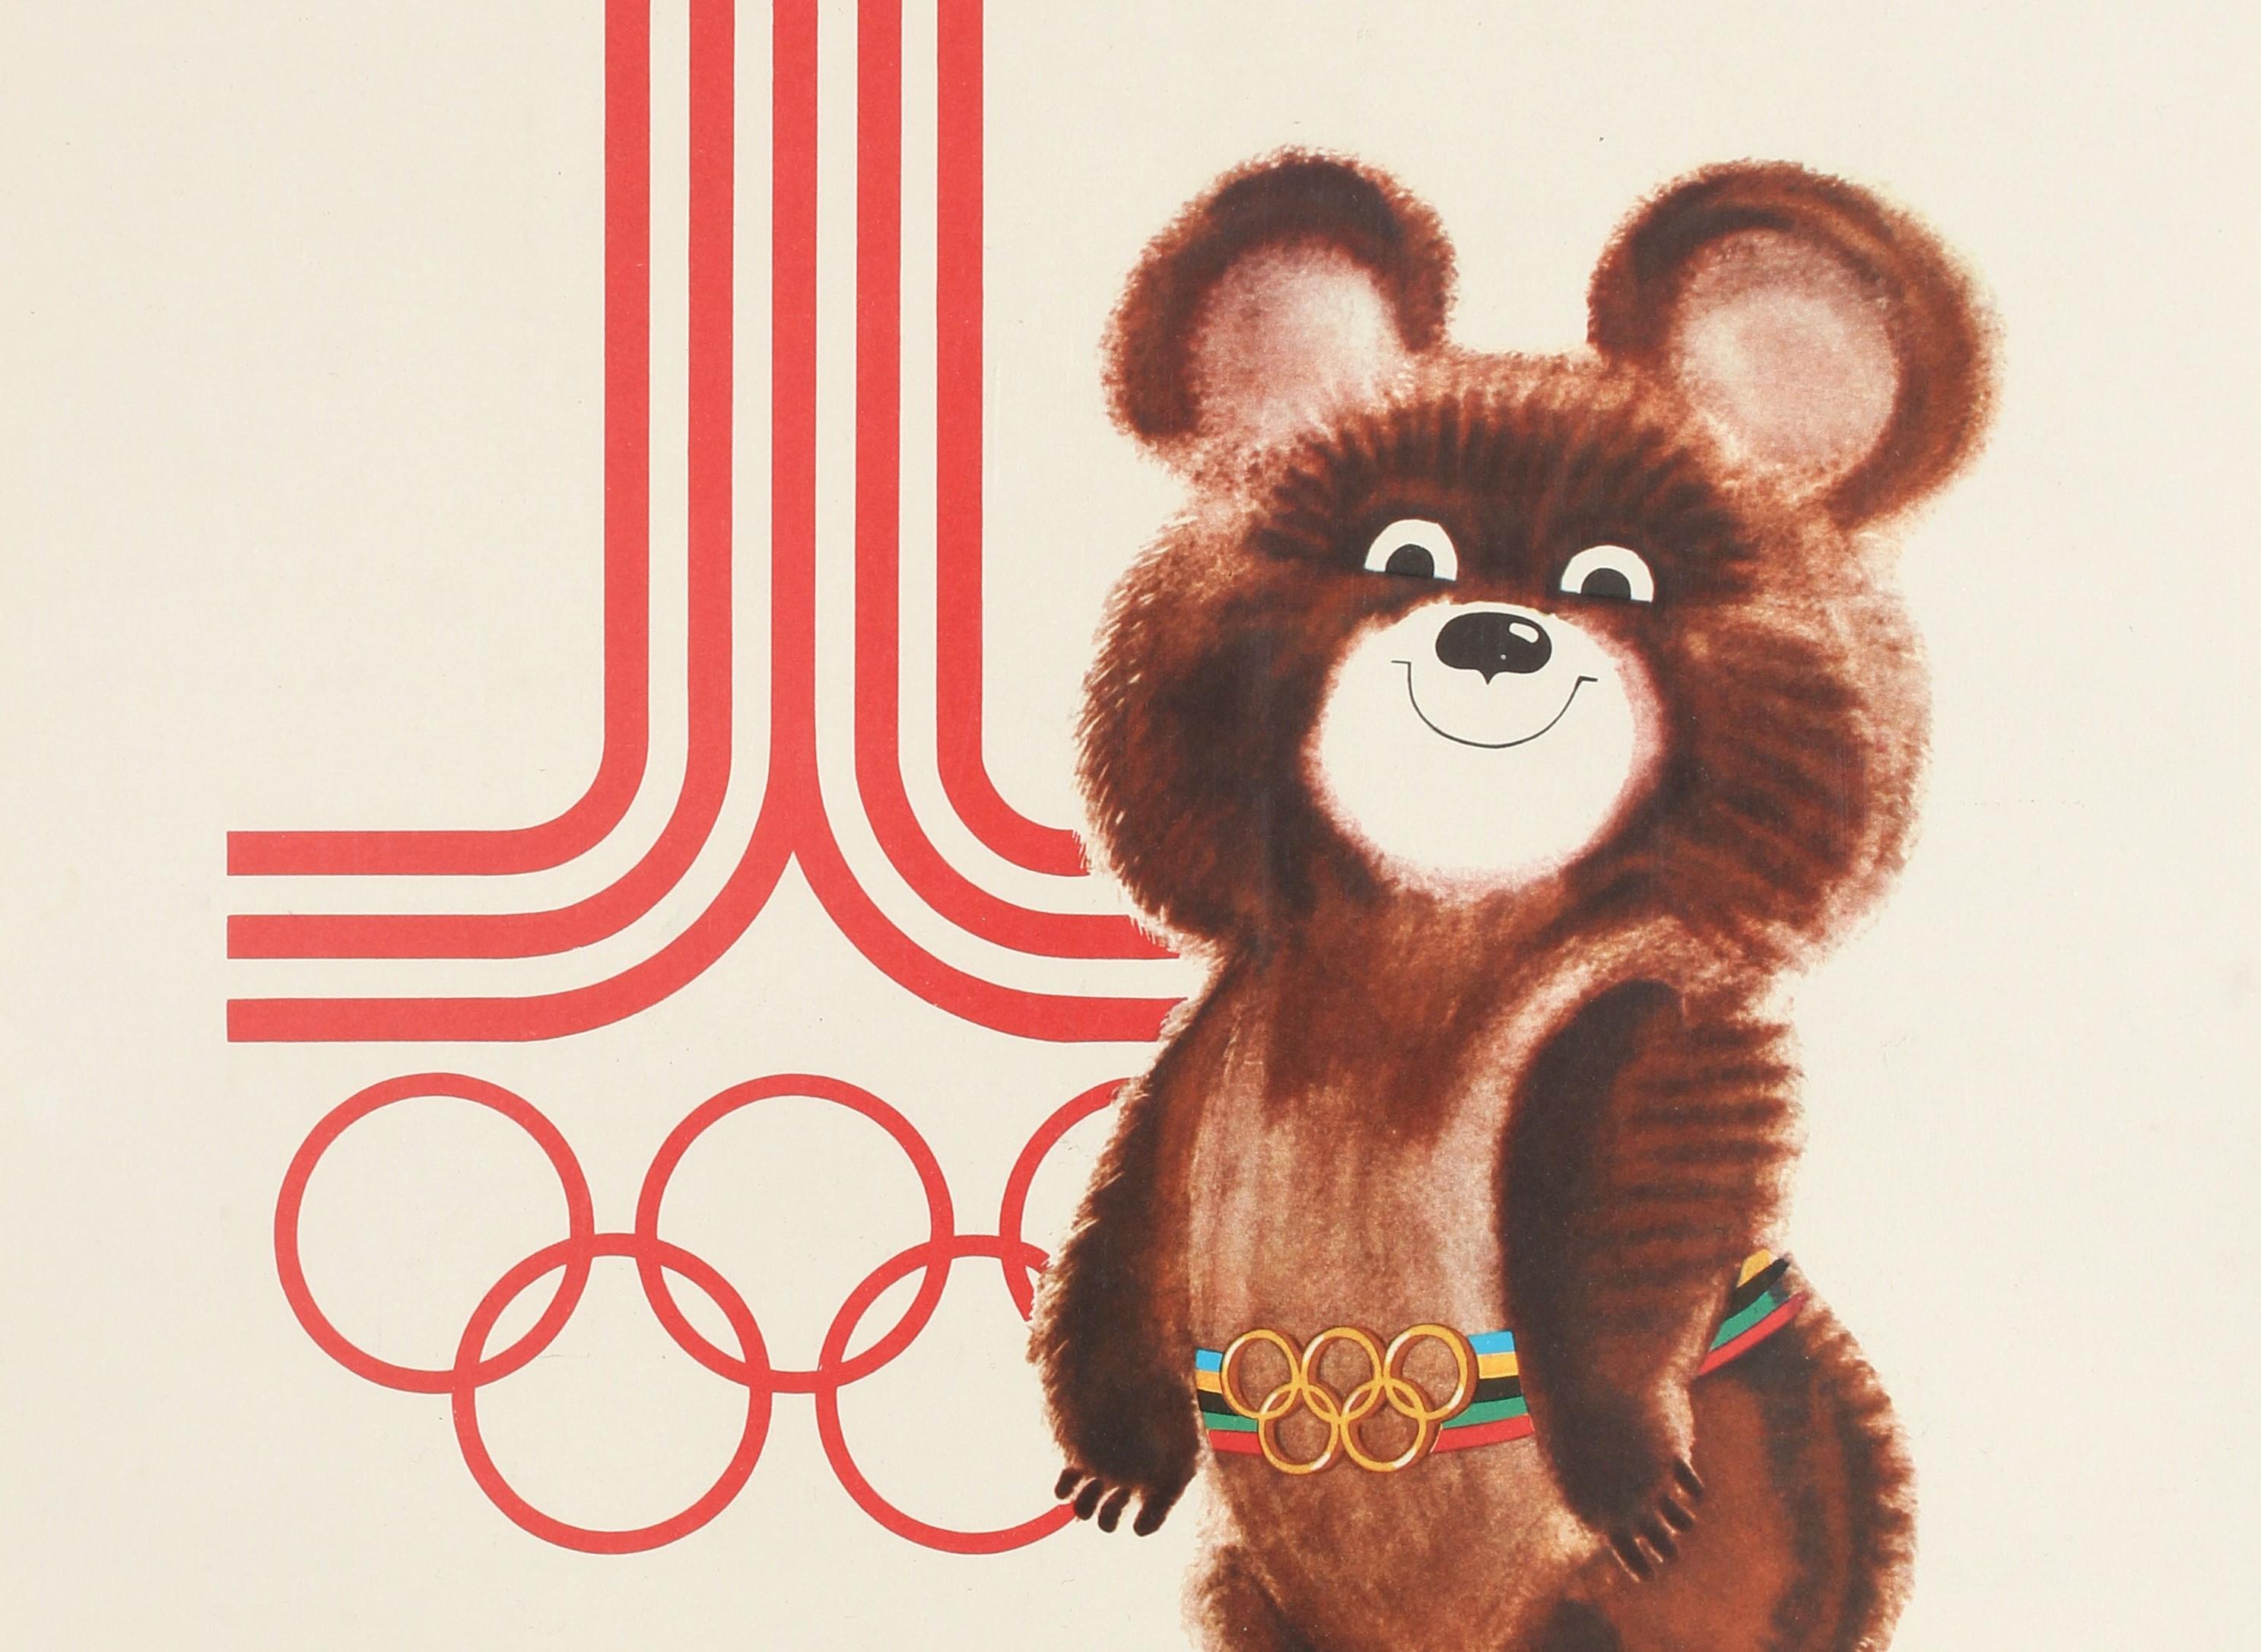 moscow olympics poster